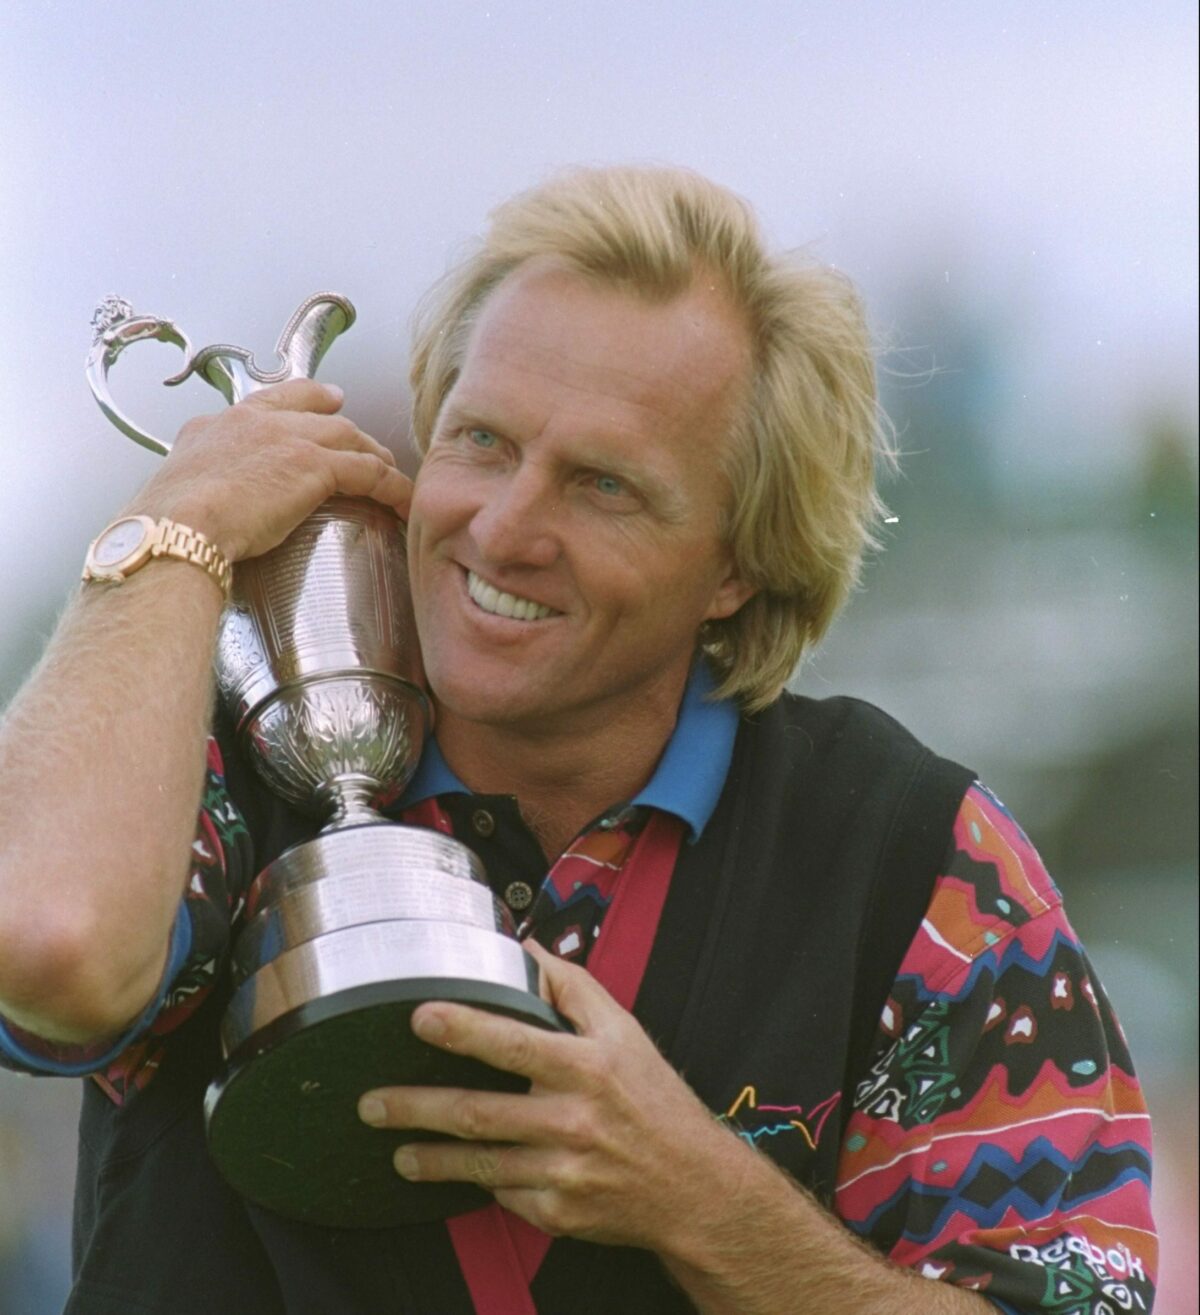 The R&A to Greg Norman: Stay away from the 150th Open Championship at St. Andrews